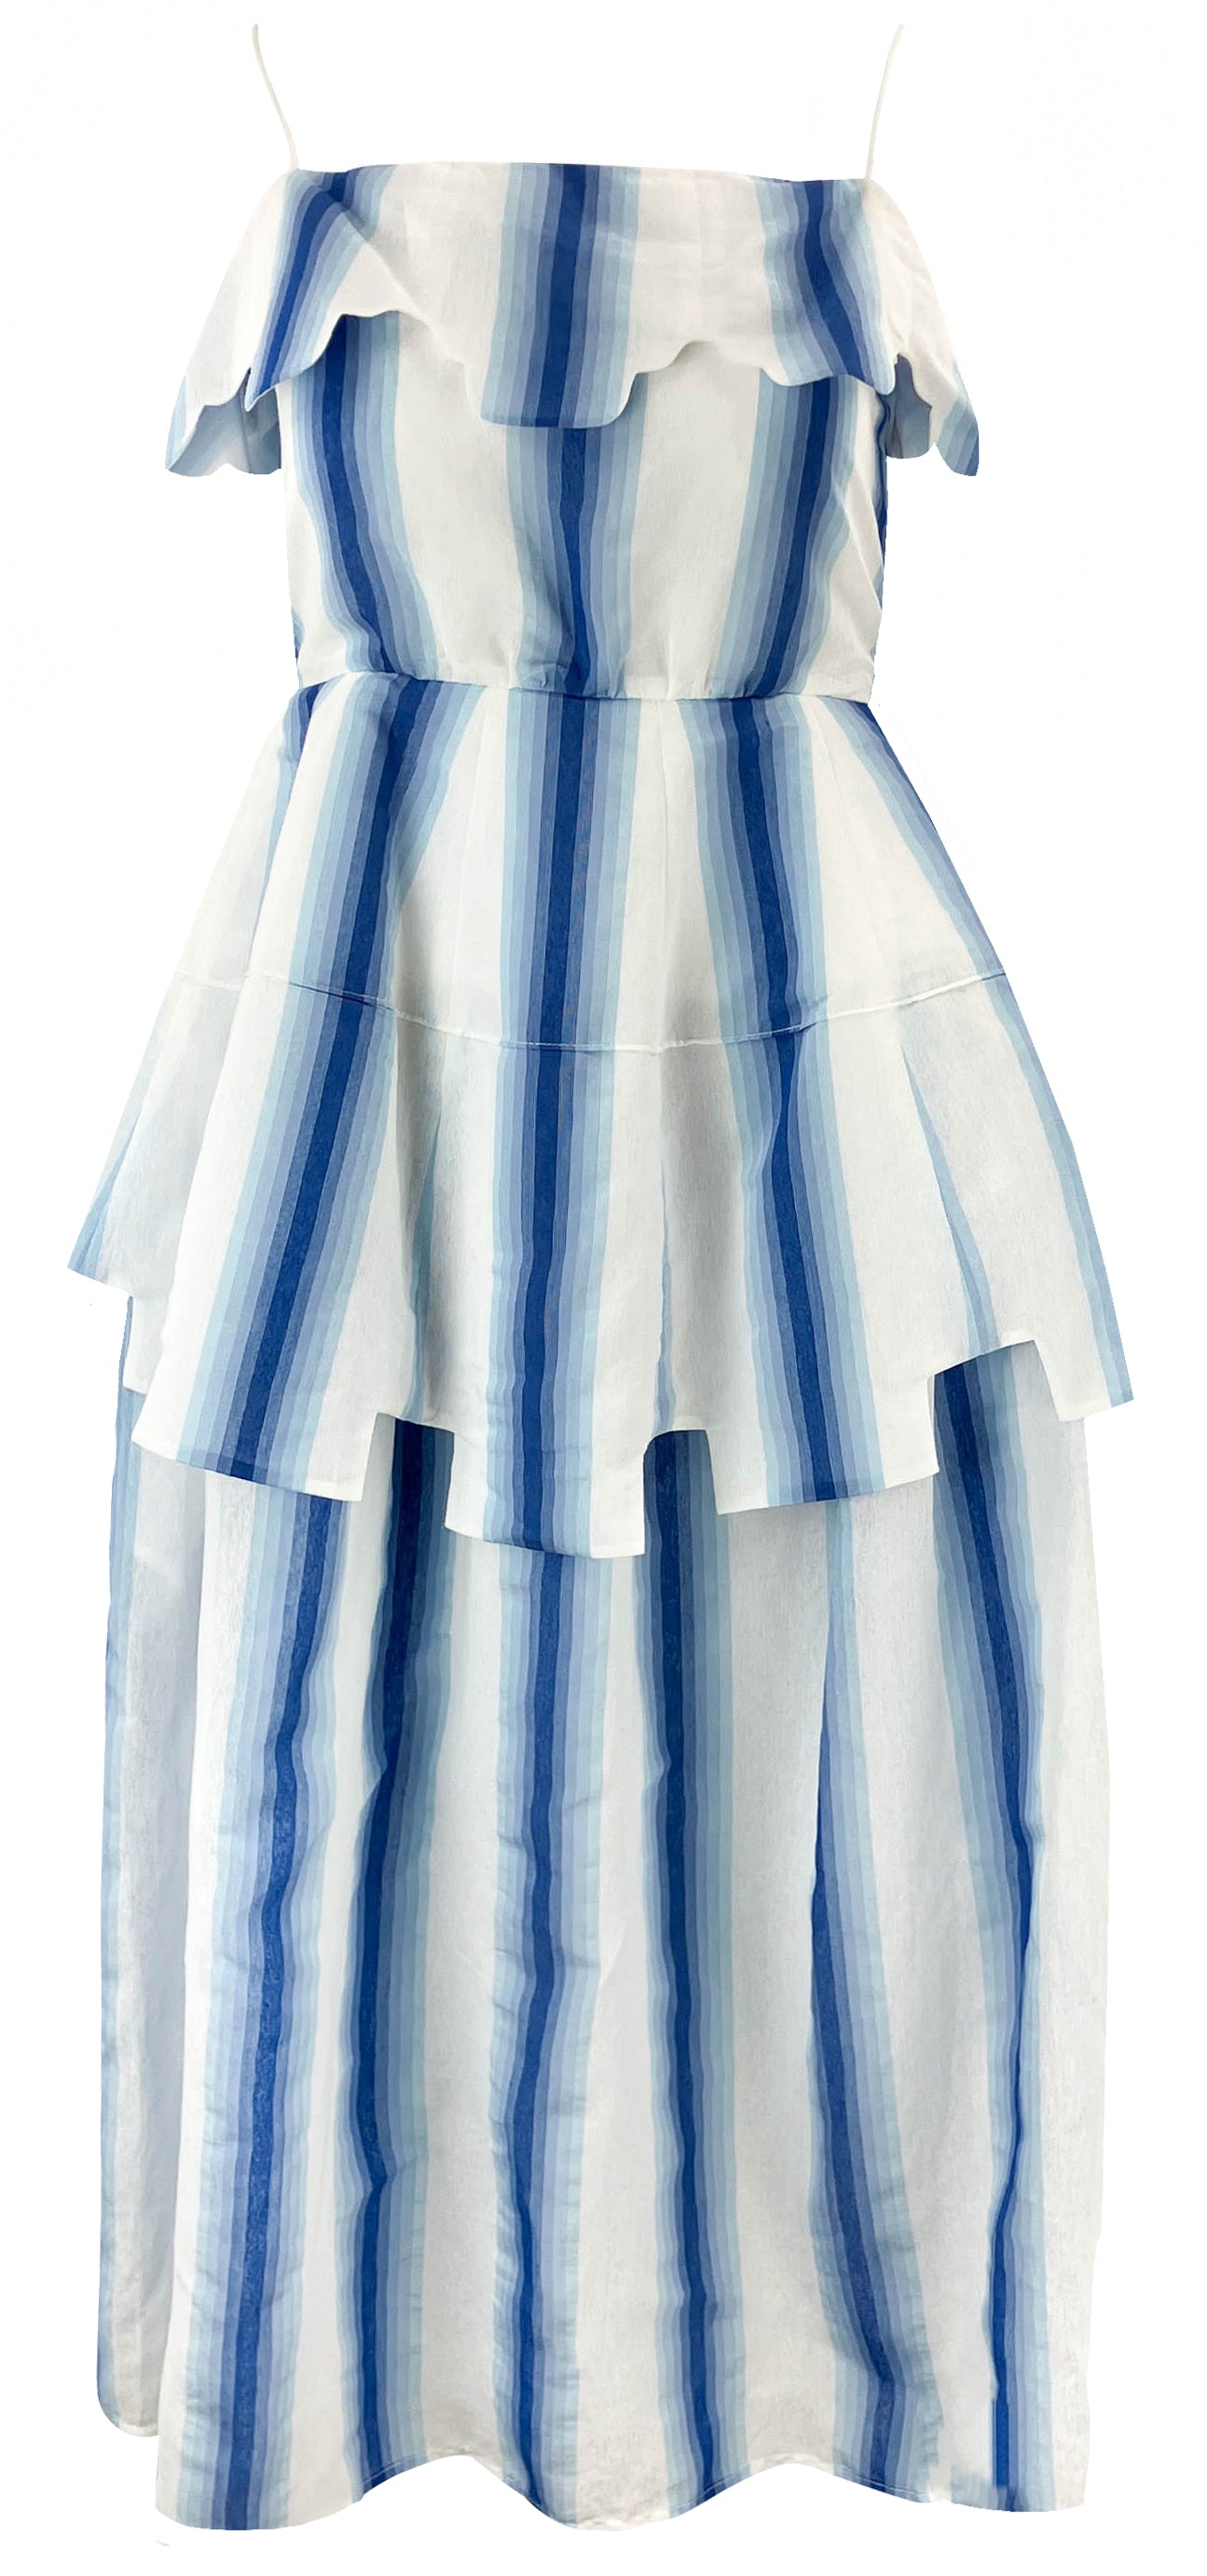 Rosie Assoulin Awning Flared Midi Dress in Blue Ombré - Discounts on Rosie Assoulin at UAL